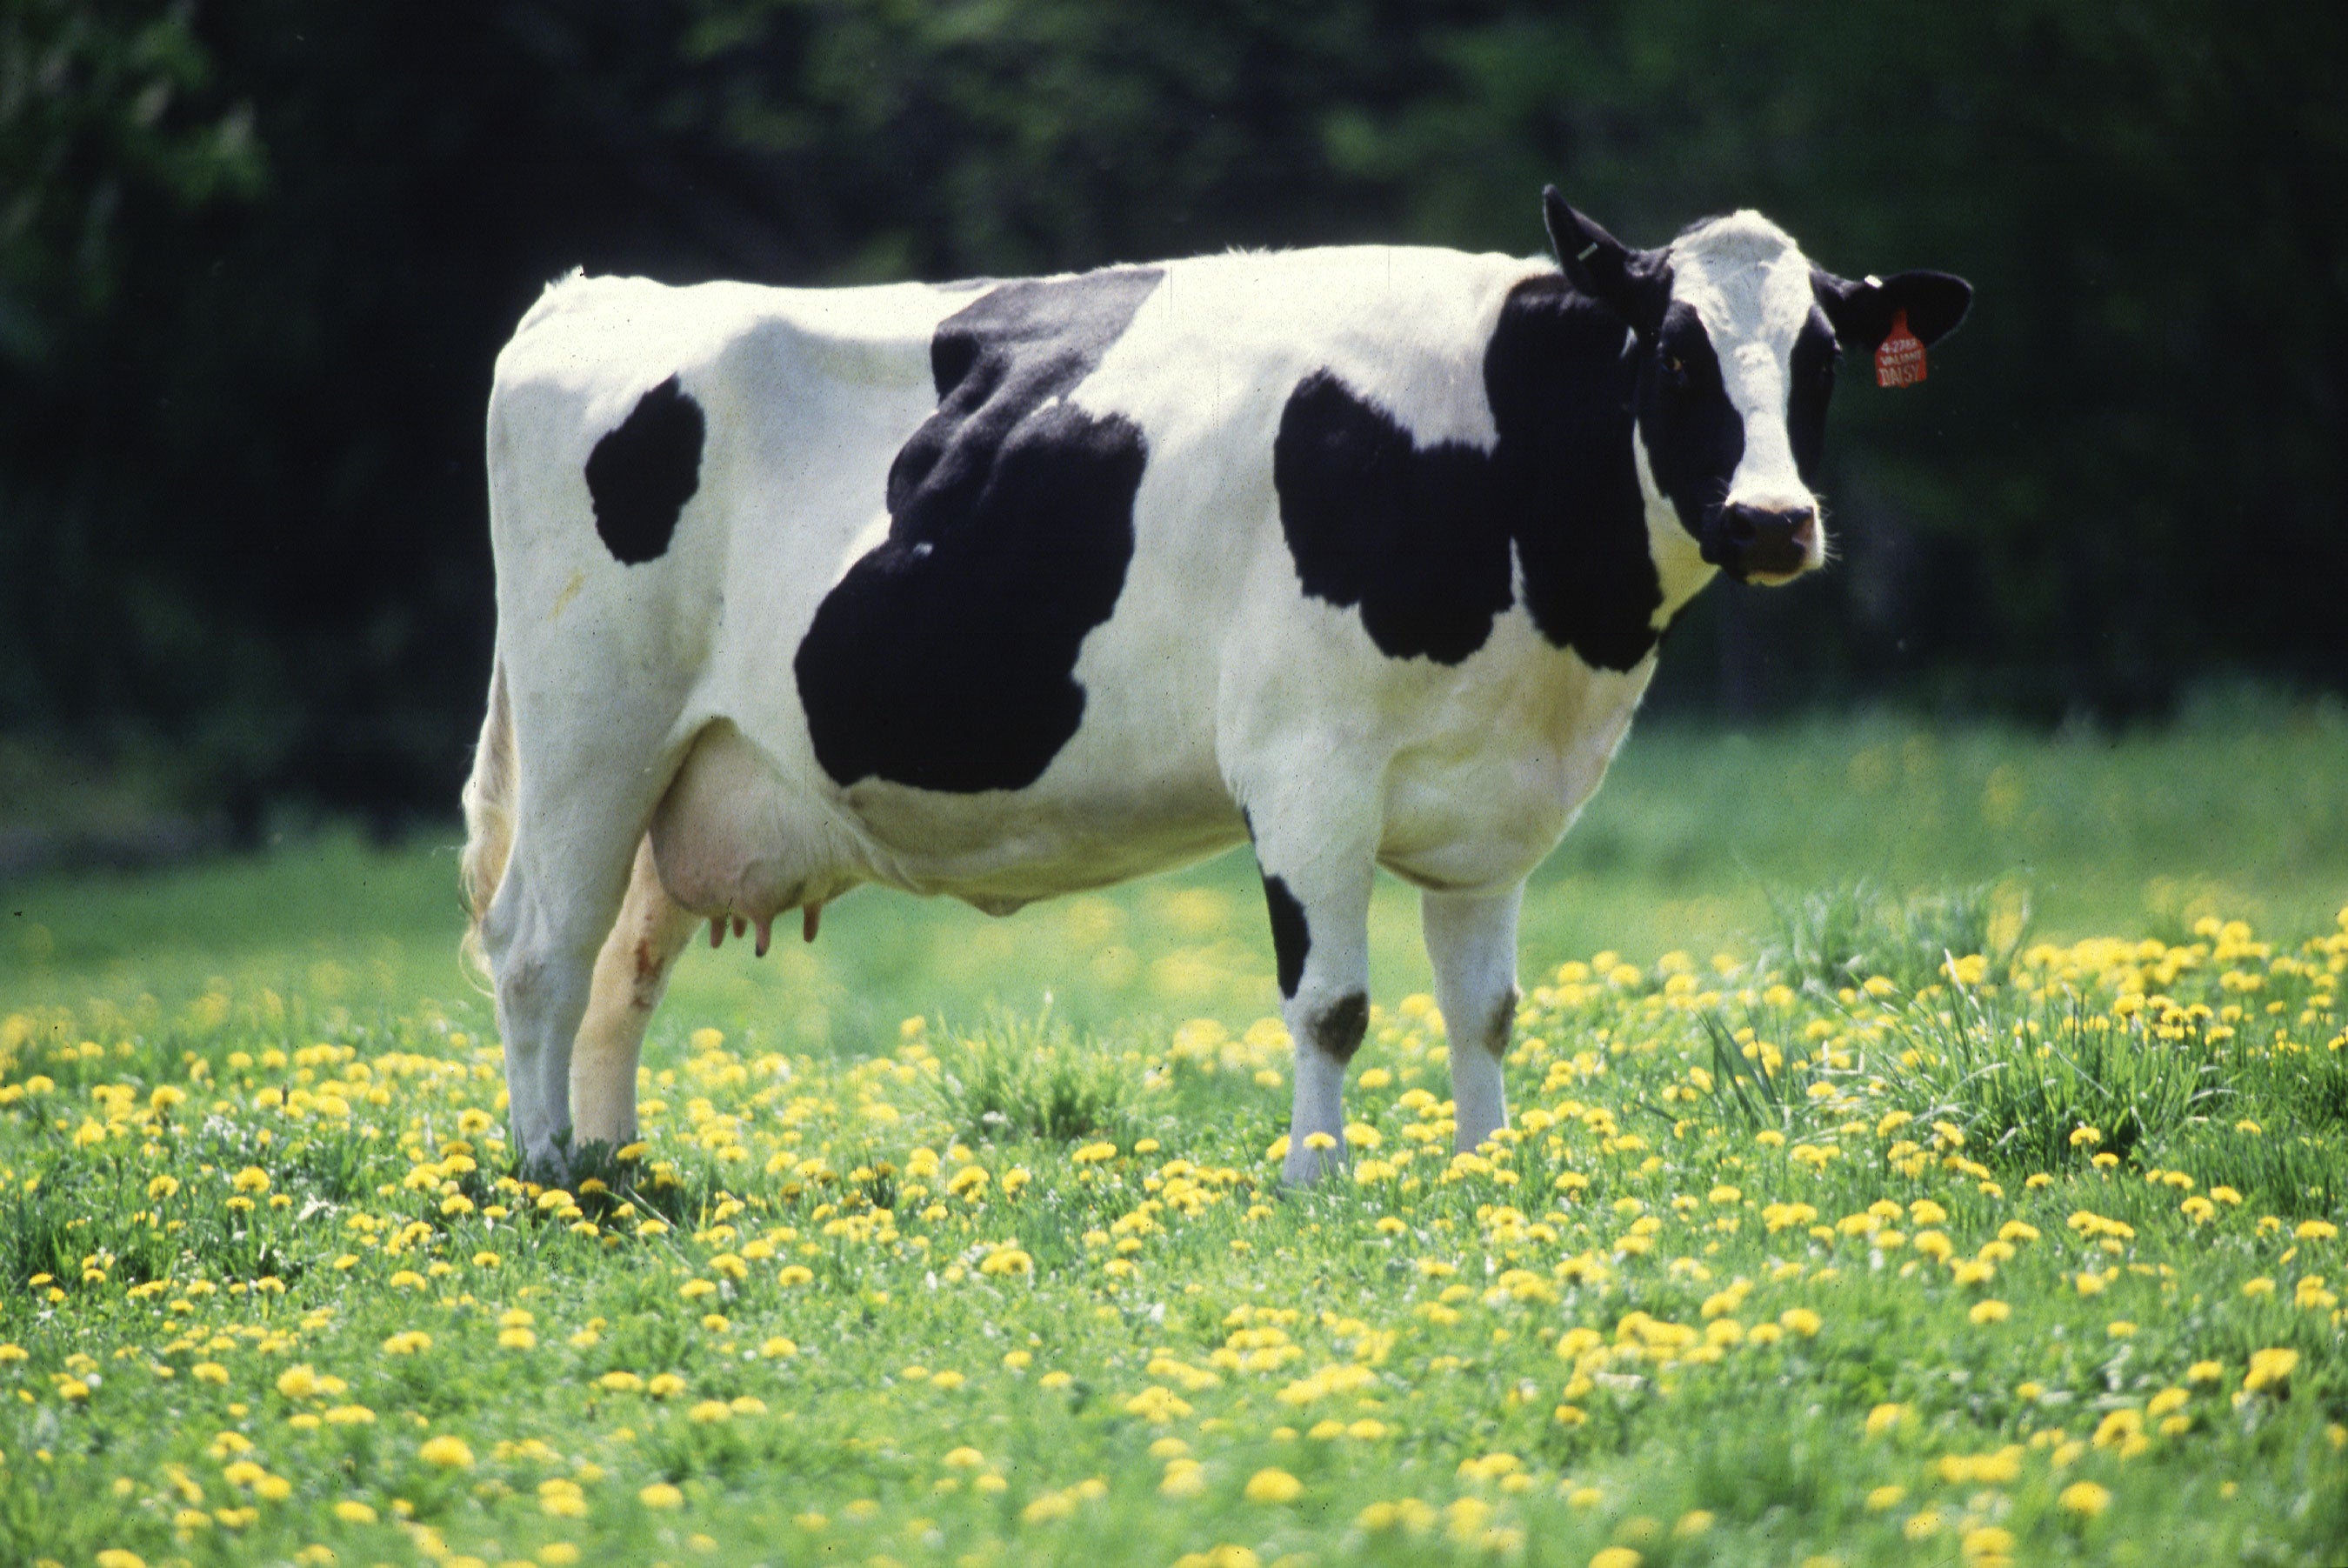 Were You Aware That Cows Can Extract THC from Hemp?